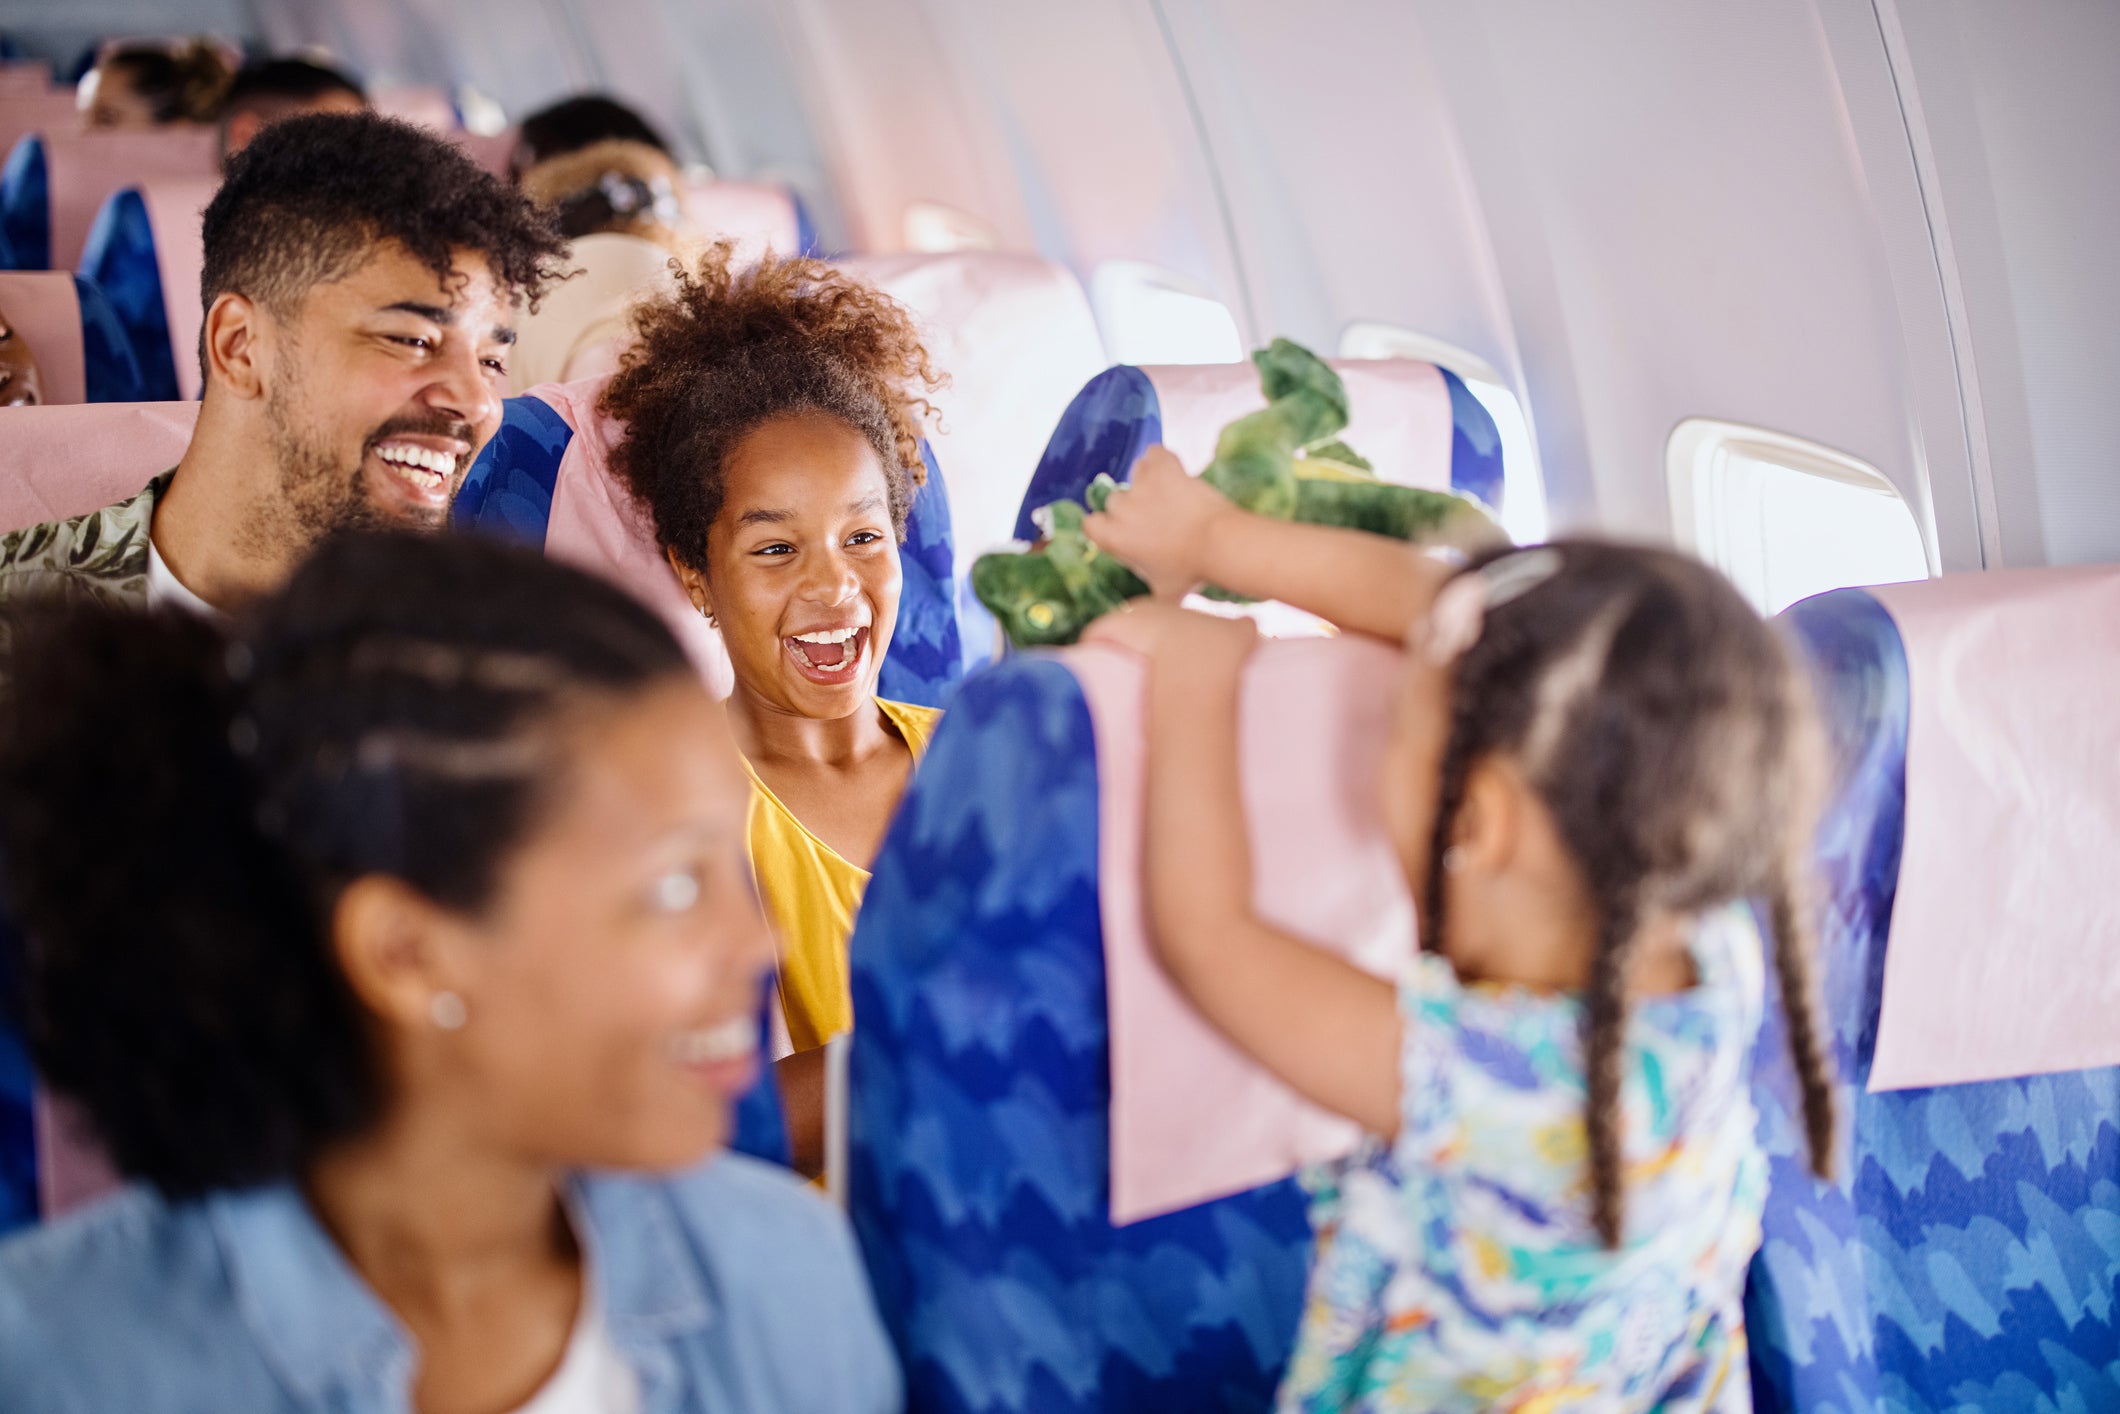 How To Keep Kids Engaged And Ignore Judgmental People When Traveling With Children